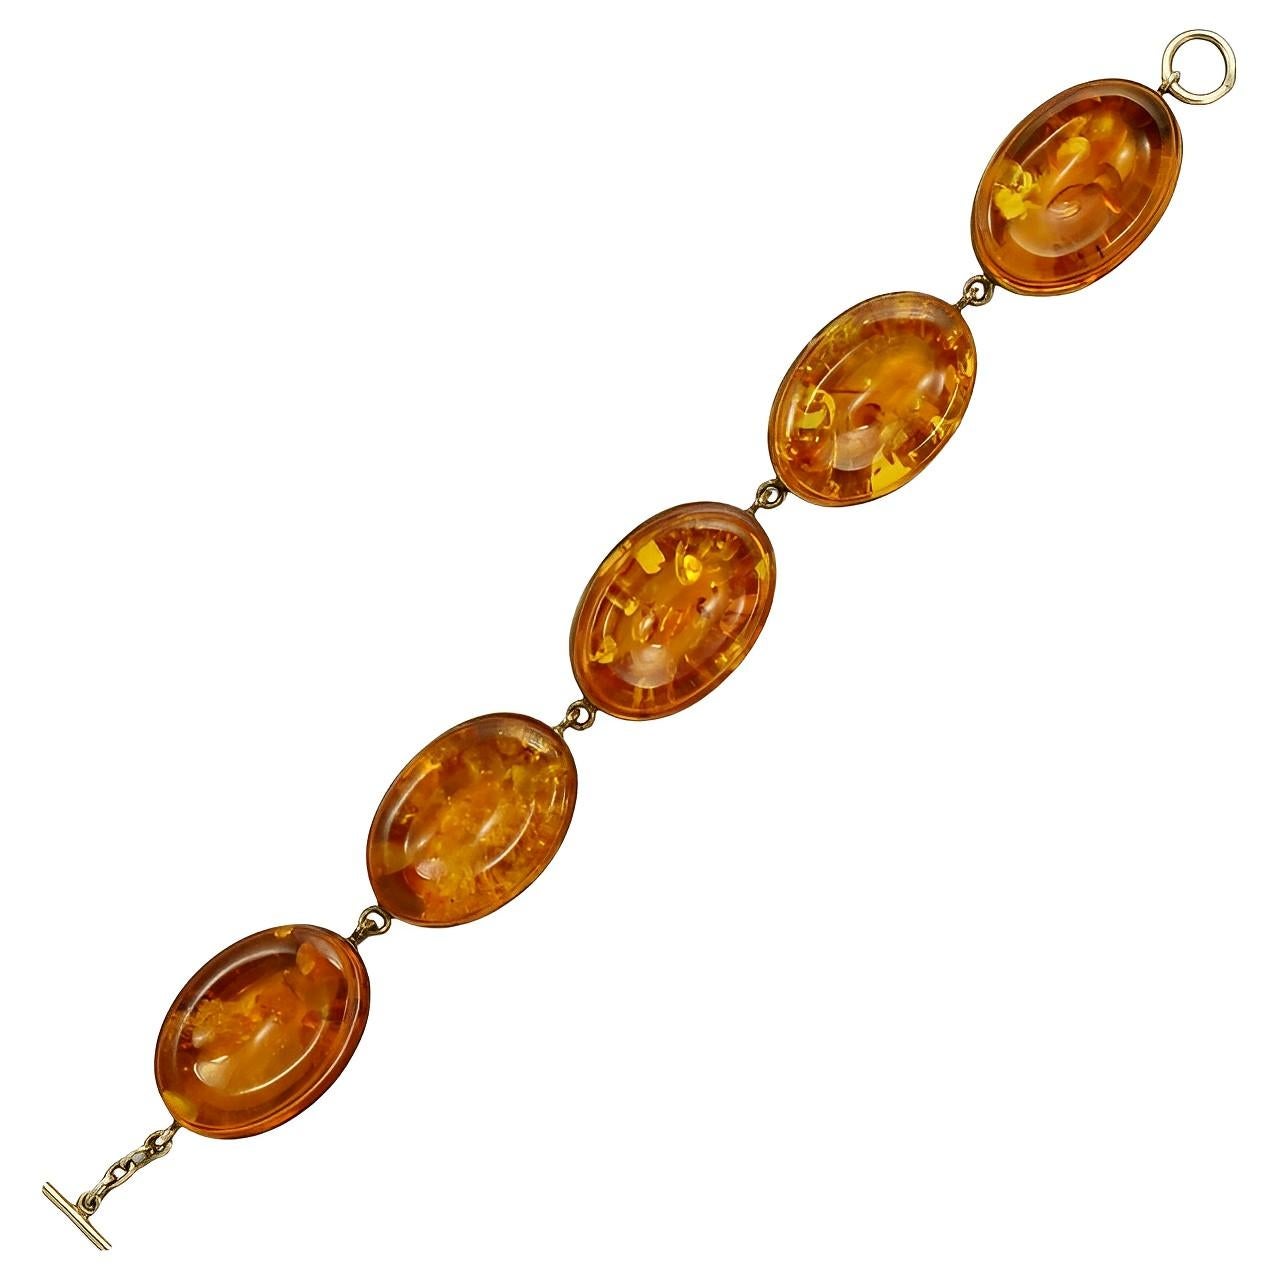 Oval Polished Amber Link Bracelet Set in Gold Vermeil on Sterling Silver Links In Good Condition For Sale In London, GB